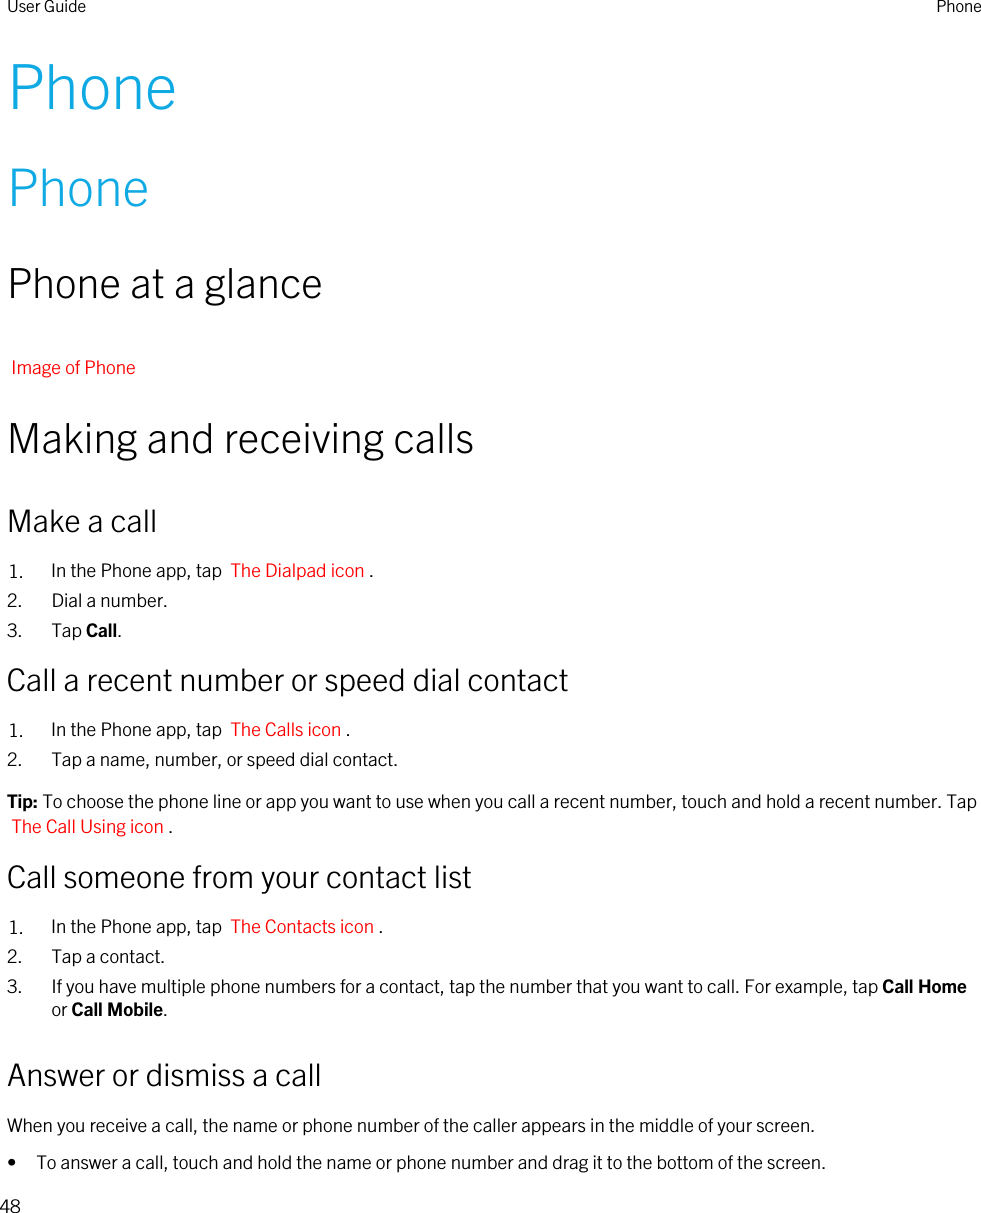 PhonePhonePhone at a glanceImage of PhoneMaking and receiving callsMake a call1. In the Phone app, tap  The Dialpad icon .2. Dial a number.3. Tap Call.Call a recent number or speed dial contact1. In the Phone app, tap  The Calls icon .2. Tap a name, number, or speed dial contact.Tip: To choose the phone line or app you want to use when you call a recent number, touch and hold a recent number. Tap The Call Using icon .Call someone from your contact list1. In the Phone app, tap  The Contacts icon .2. Tap a contact.3. If you have multiple phone numbers for a contact, tap the number that you want to call. For example, tap Call Home or Call Mobile.Answer or dismiss a callWhen you receive a call, the name or phone number of the caller appears in the middle of your screen.• To answer a call, touch and hold the name or phone number and drag it to the bottom of the screen.User Guide Phone48